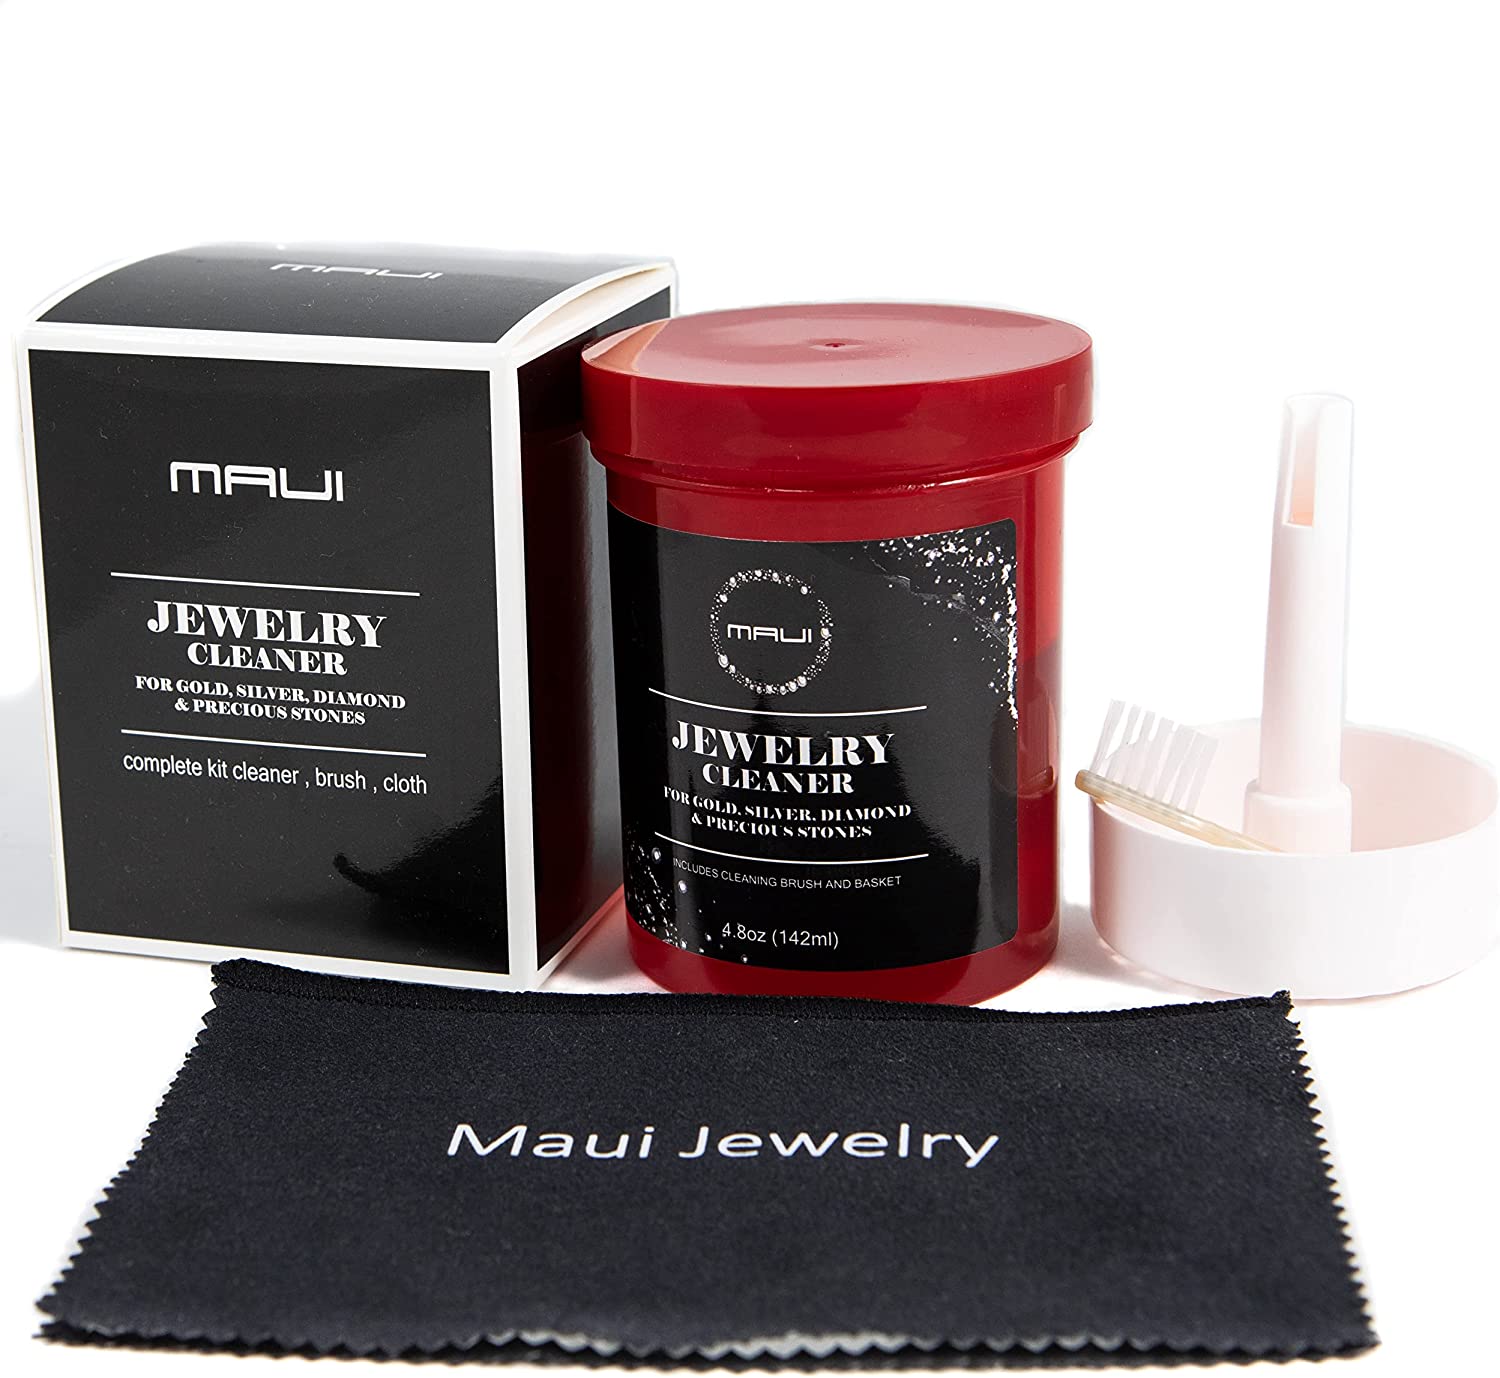 Maui Cleaning Brush & Basket Jewelry Cleaner Kit